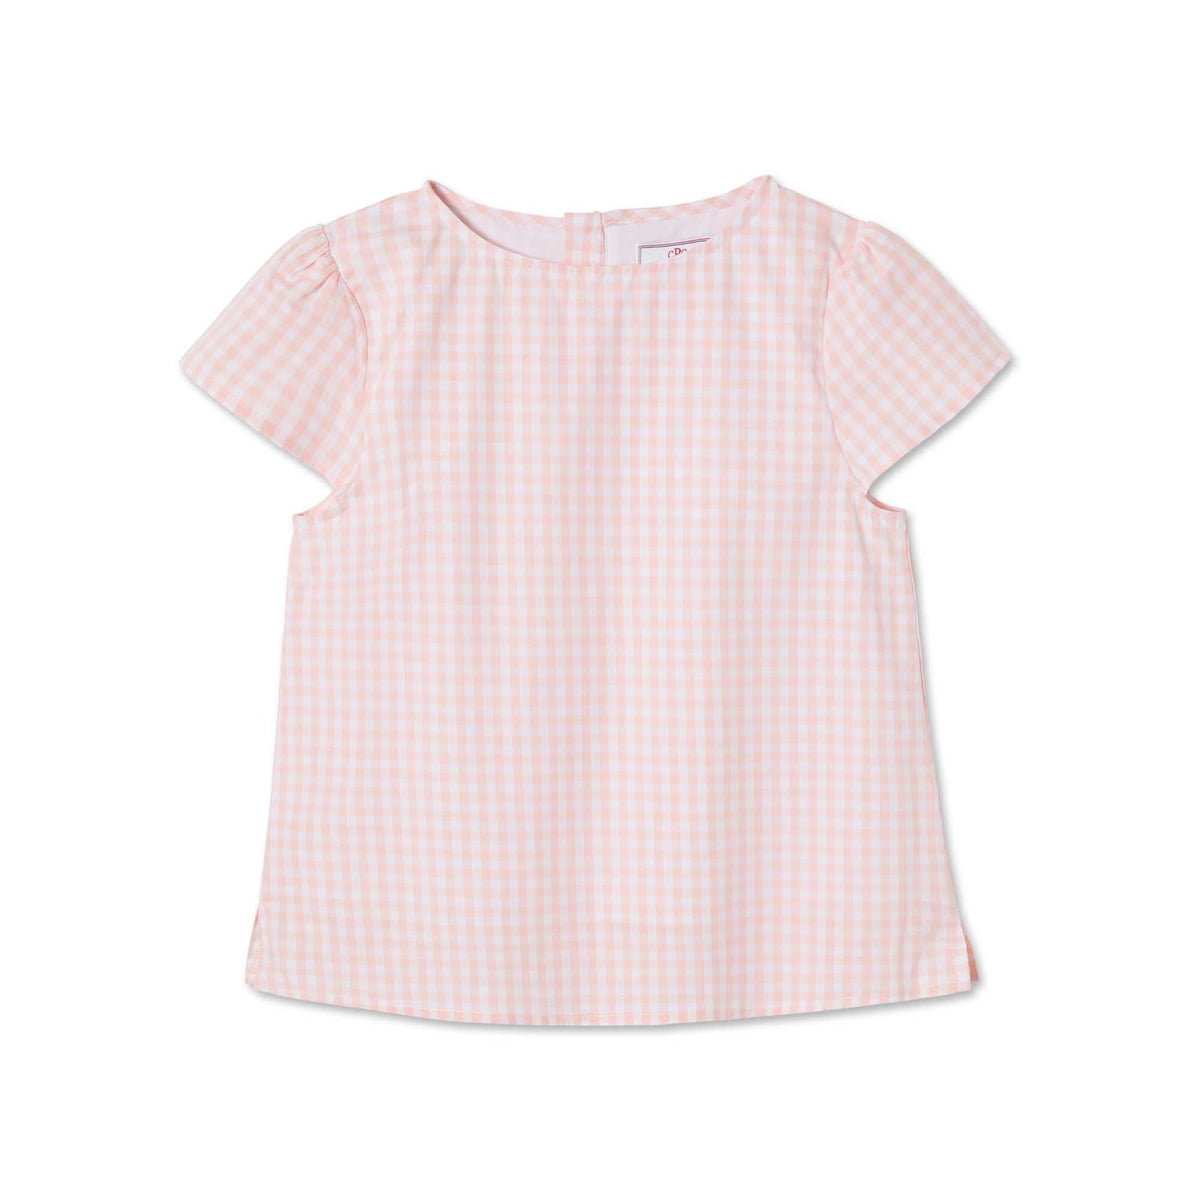 Classic and Preppy Sawyer Top, Driftway Gingham-Shirts and Tops-Driftway Gingham-2T-CPC - Classic Prep Childrenswear